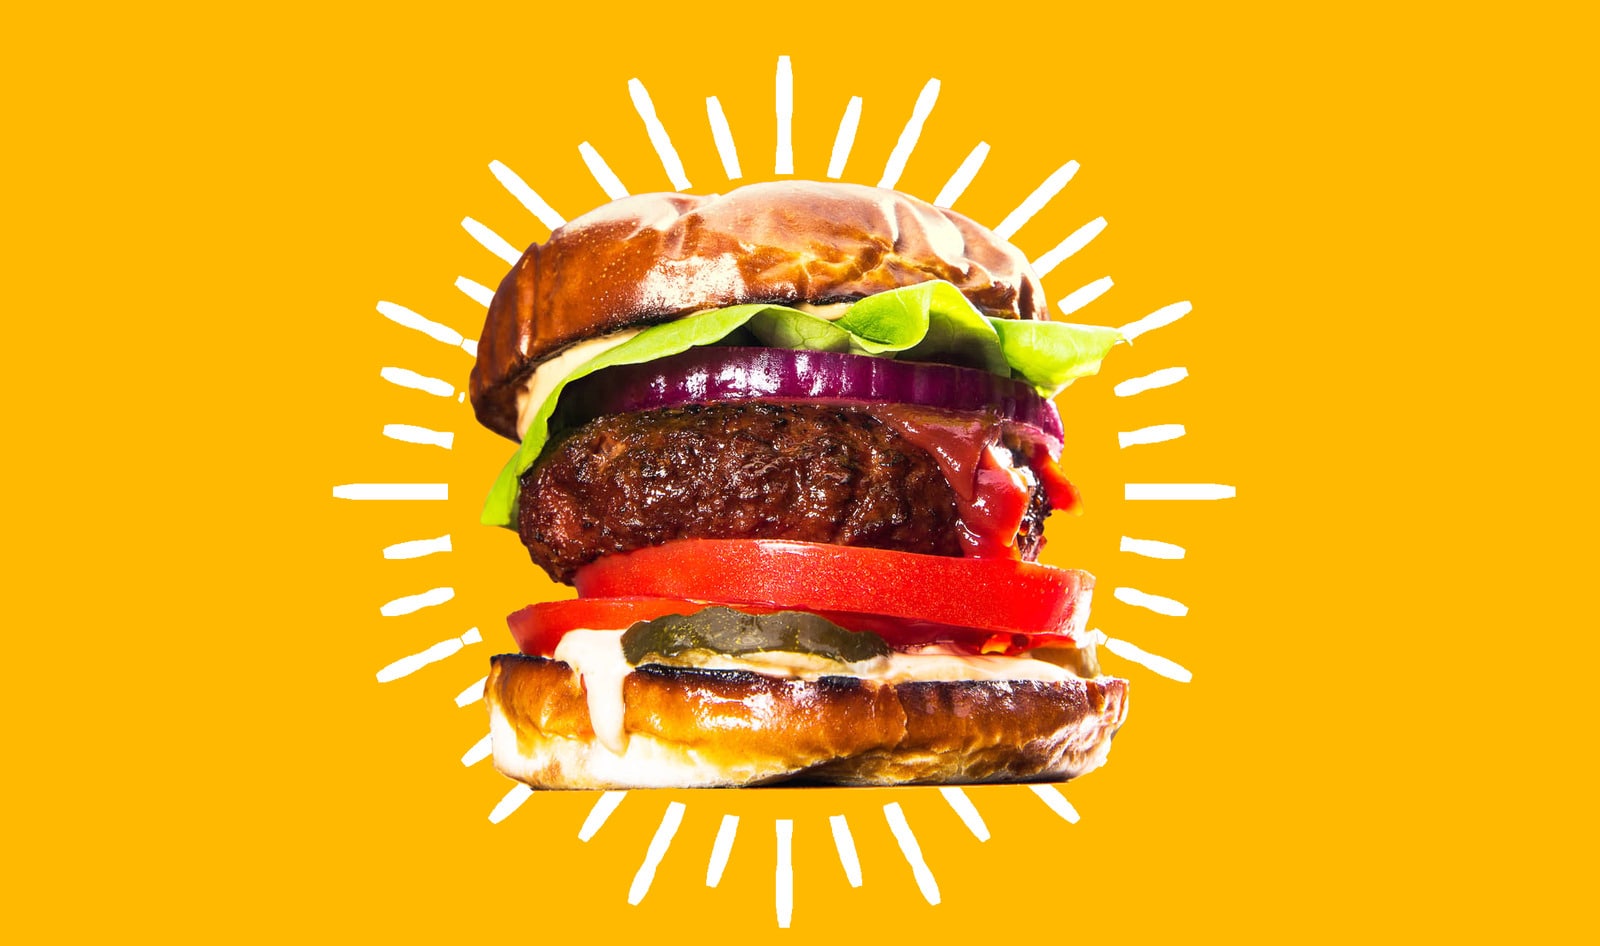 5 Reasons Why I Eat the Beyond Burger (Spoiler Alert: It Has Nothing to Do With Nutrition)&nbsp;&nbsp;